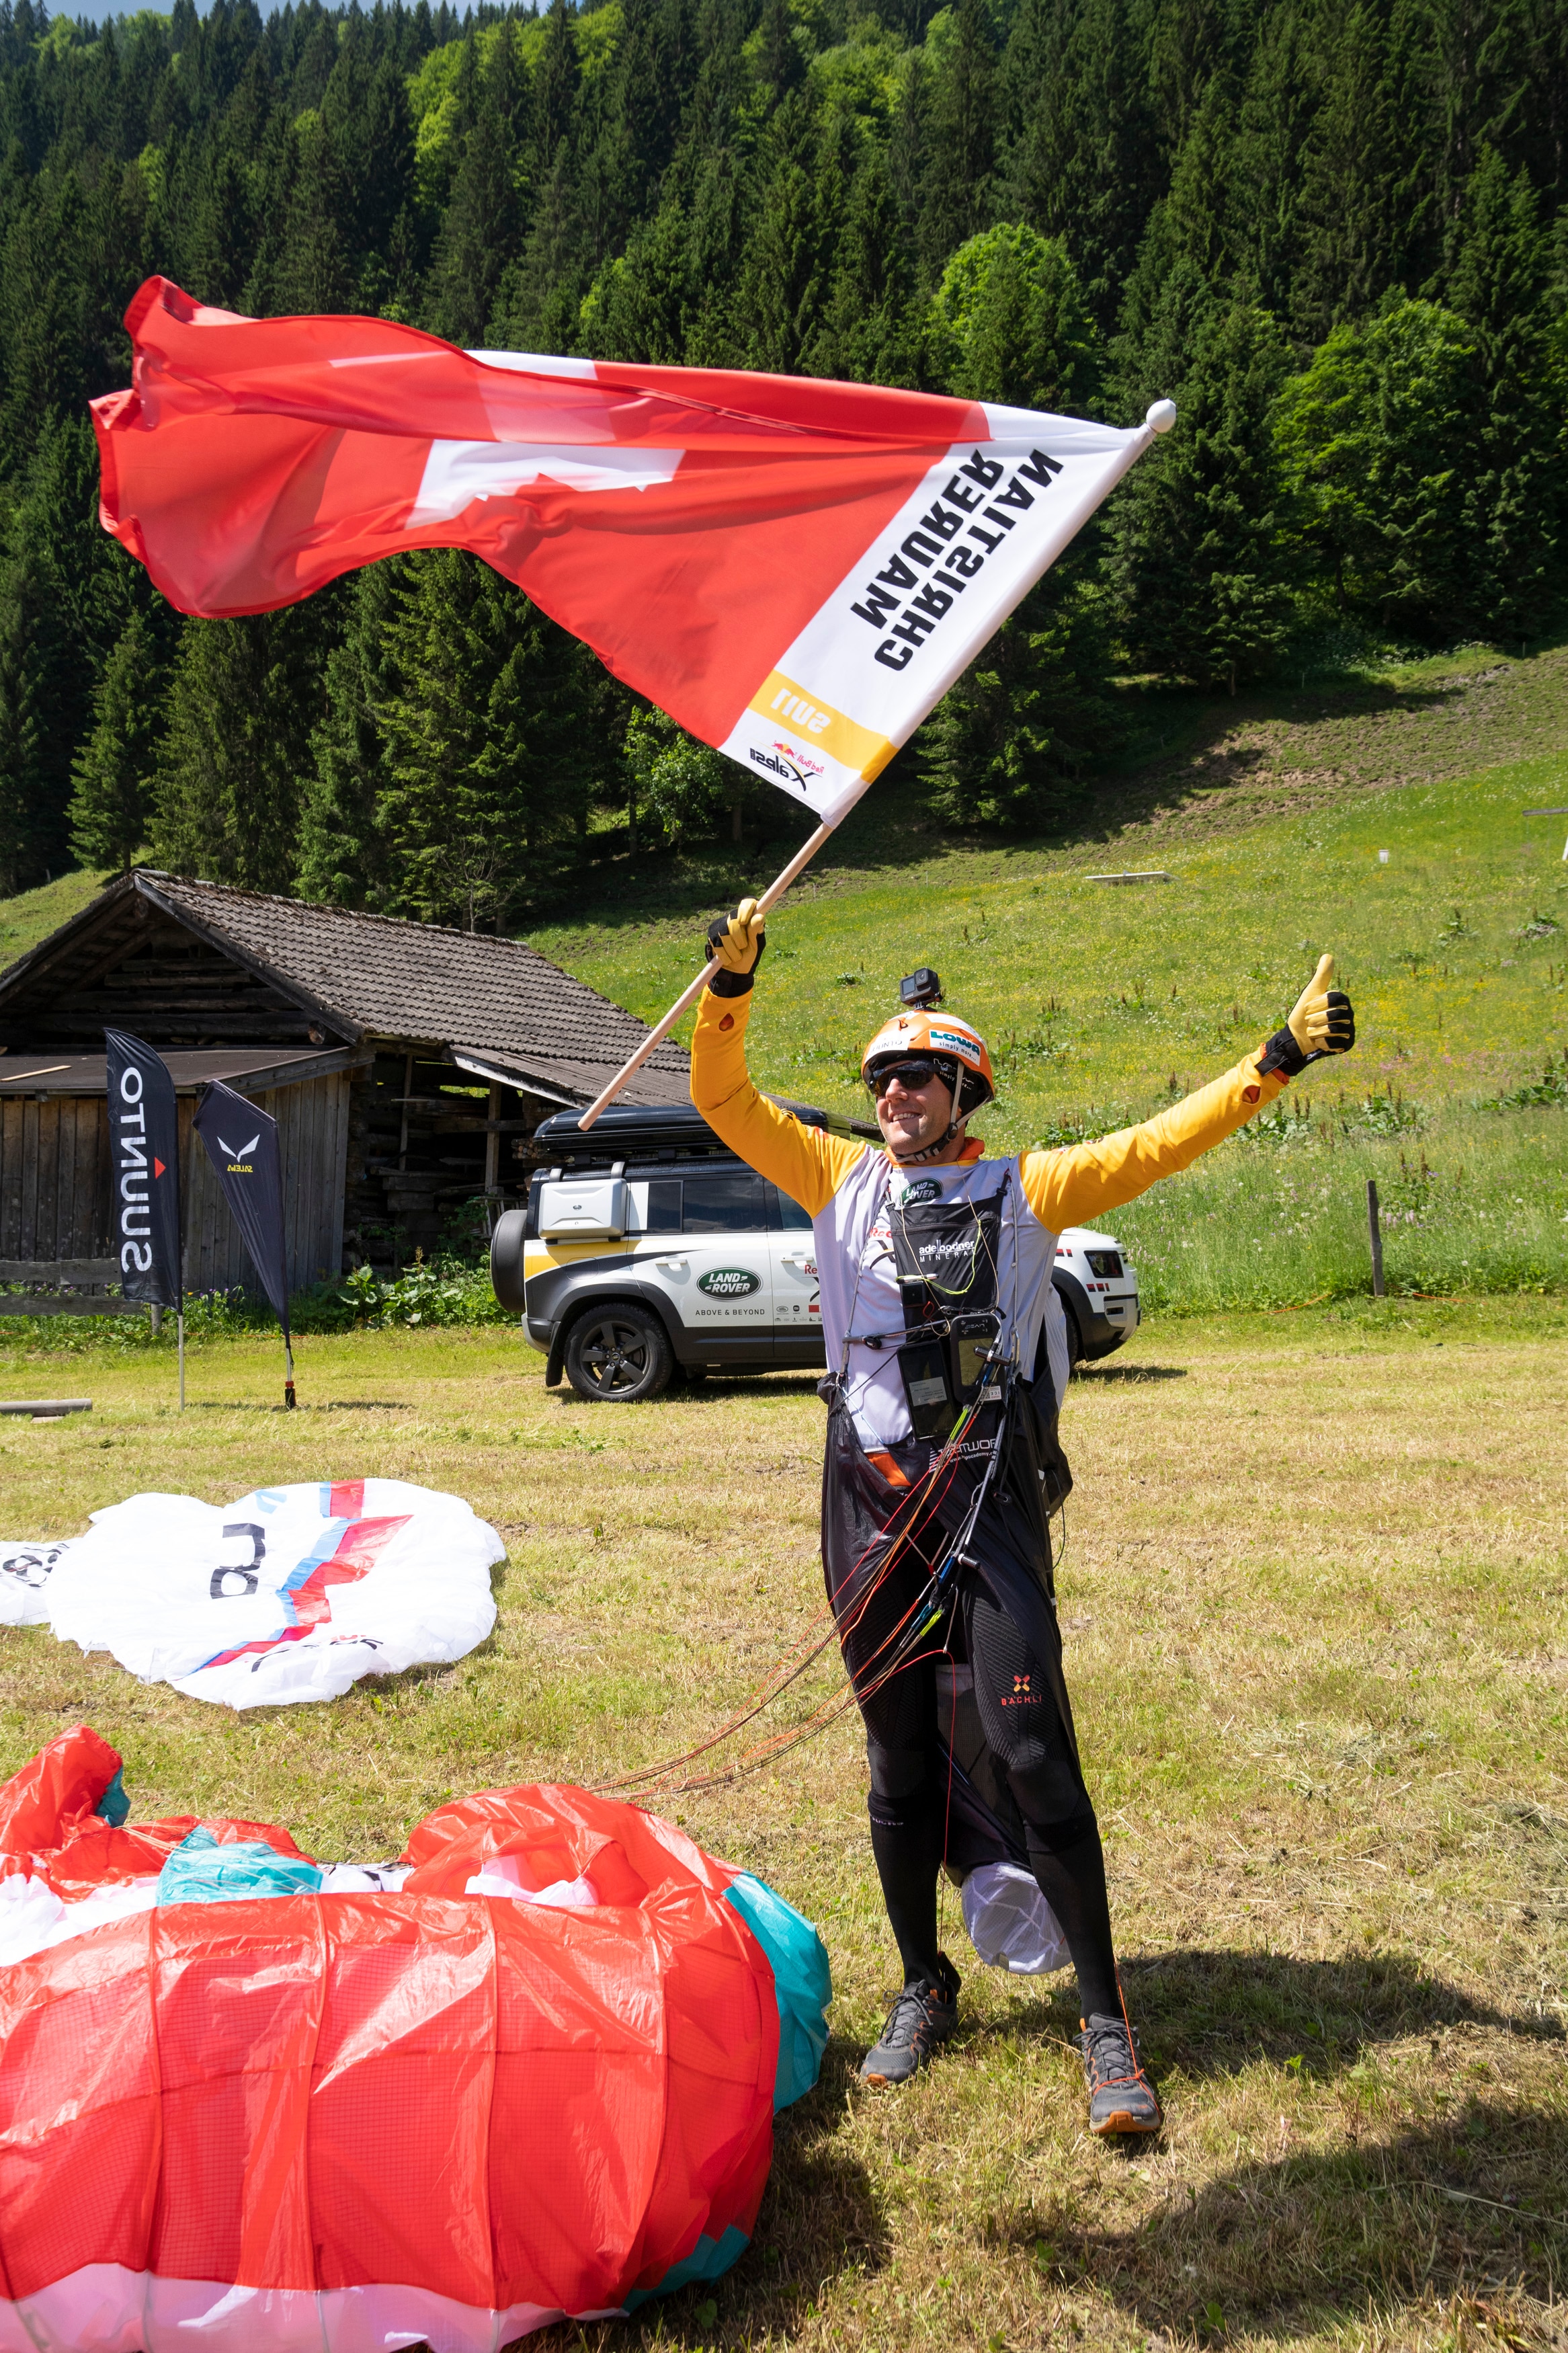 SUI1 performs during the Red Bull X-Alps Prologue in Kleinarl, Austria on June 17, 2021.